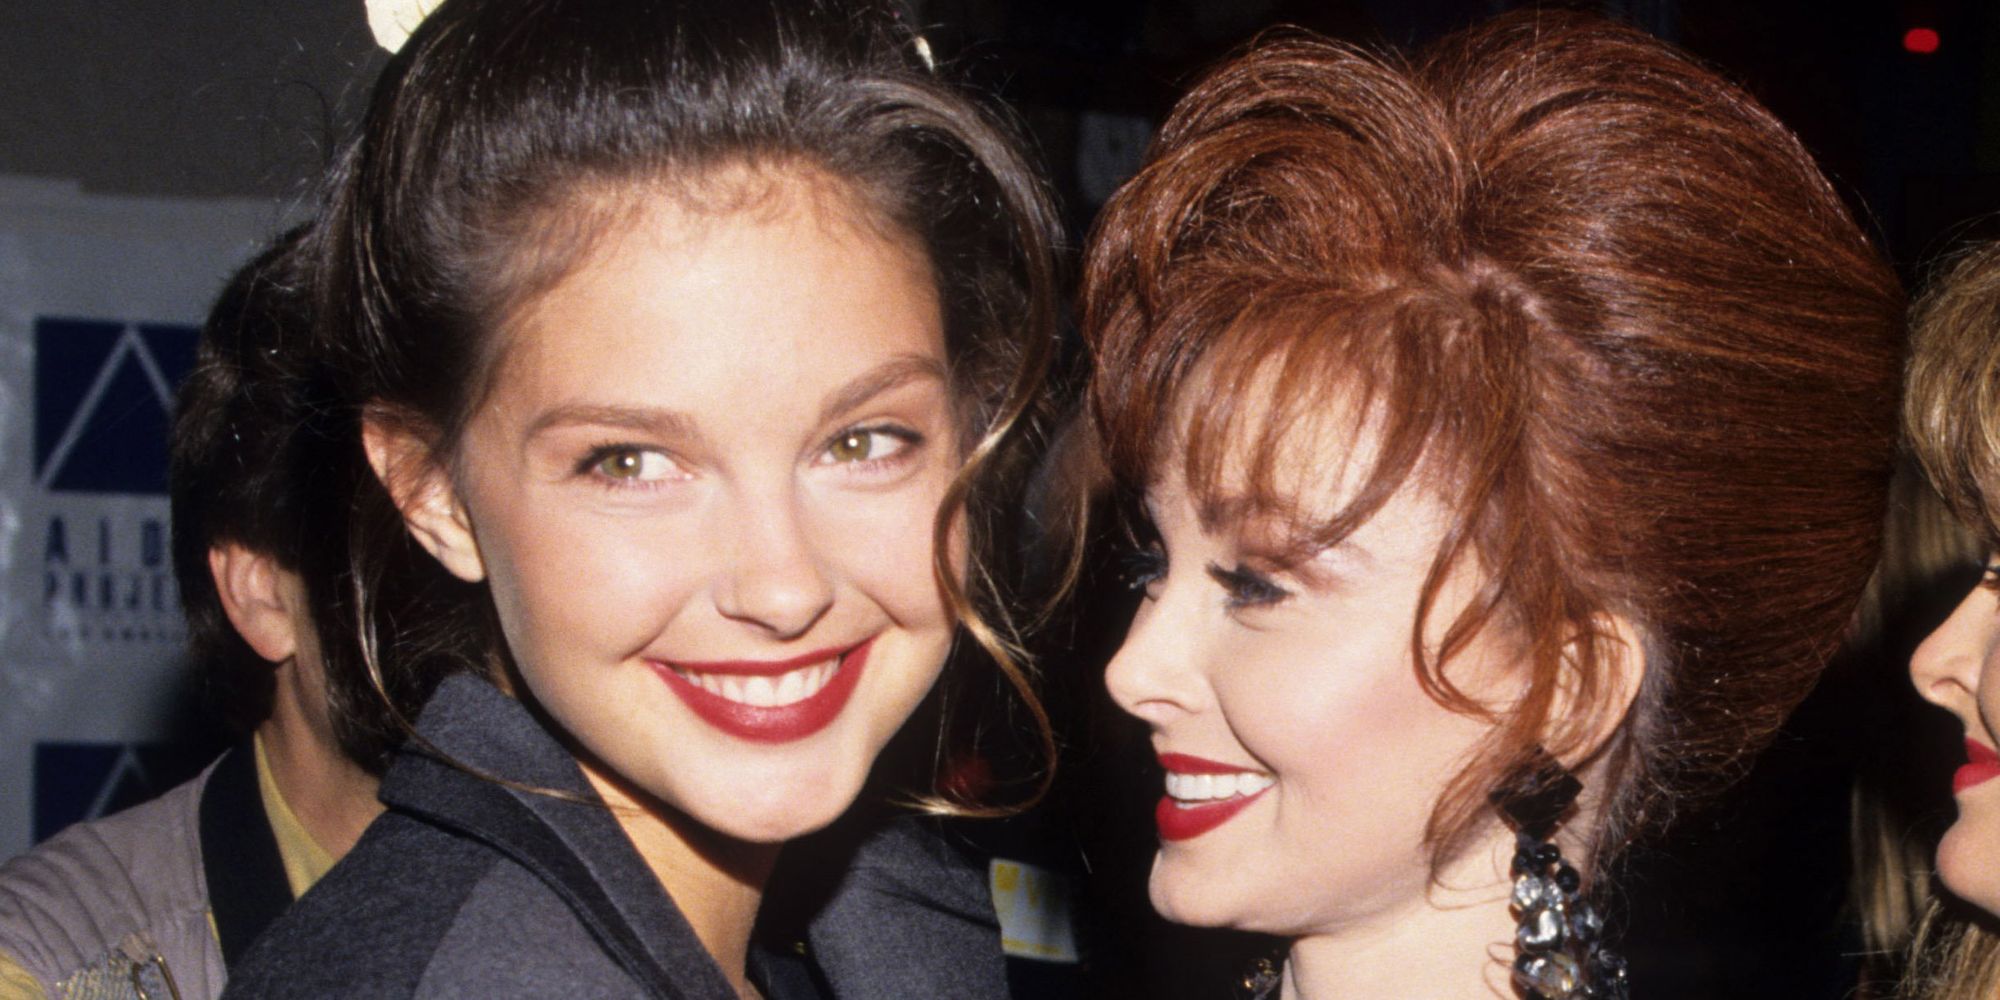 How Ashley Judd Moved Her Mother To Tears With Just 5 Words | The ...